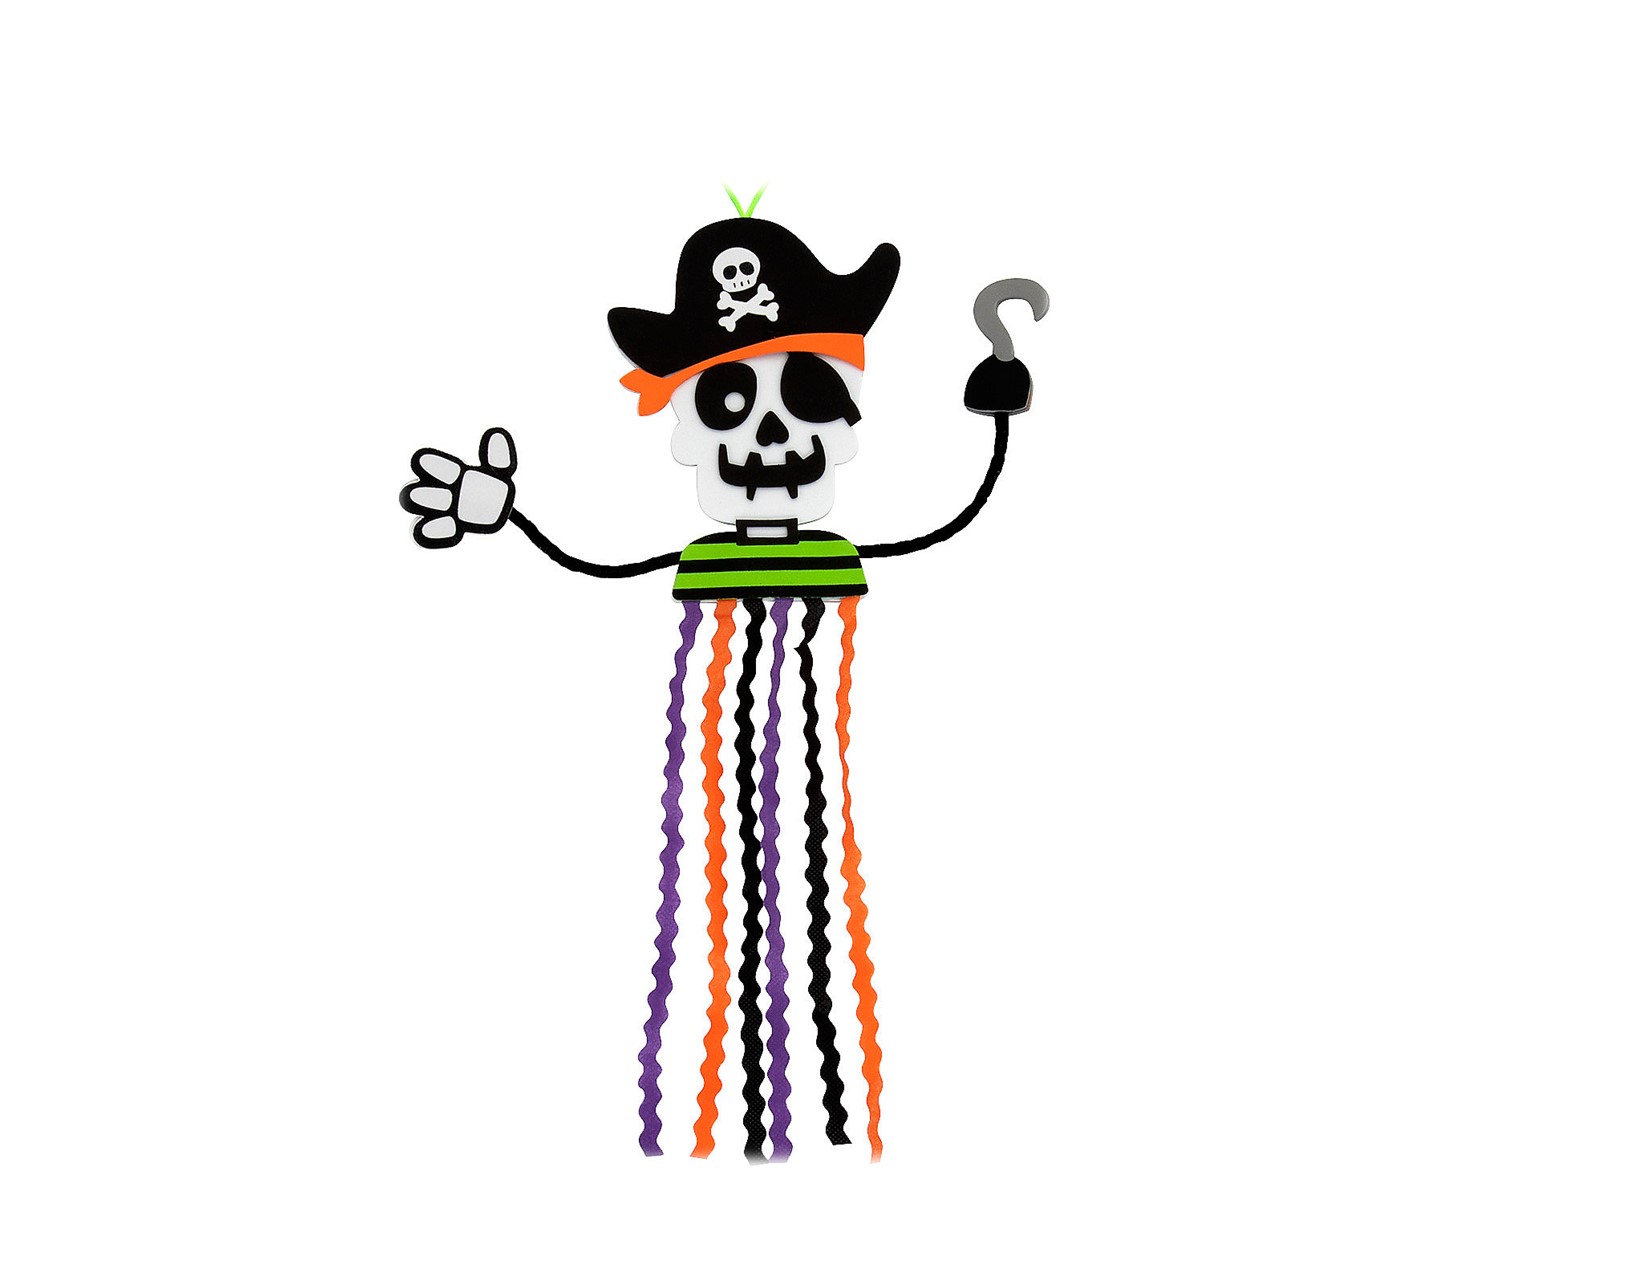 pirate skeleton with hat, eye patch and hook hand; purple, black and orange streamers hanging from shirt